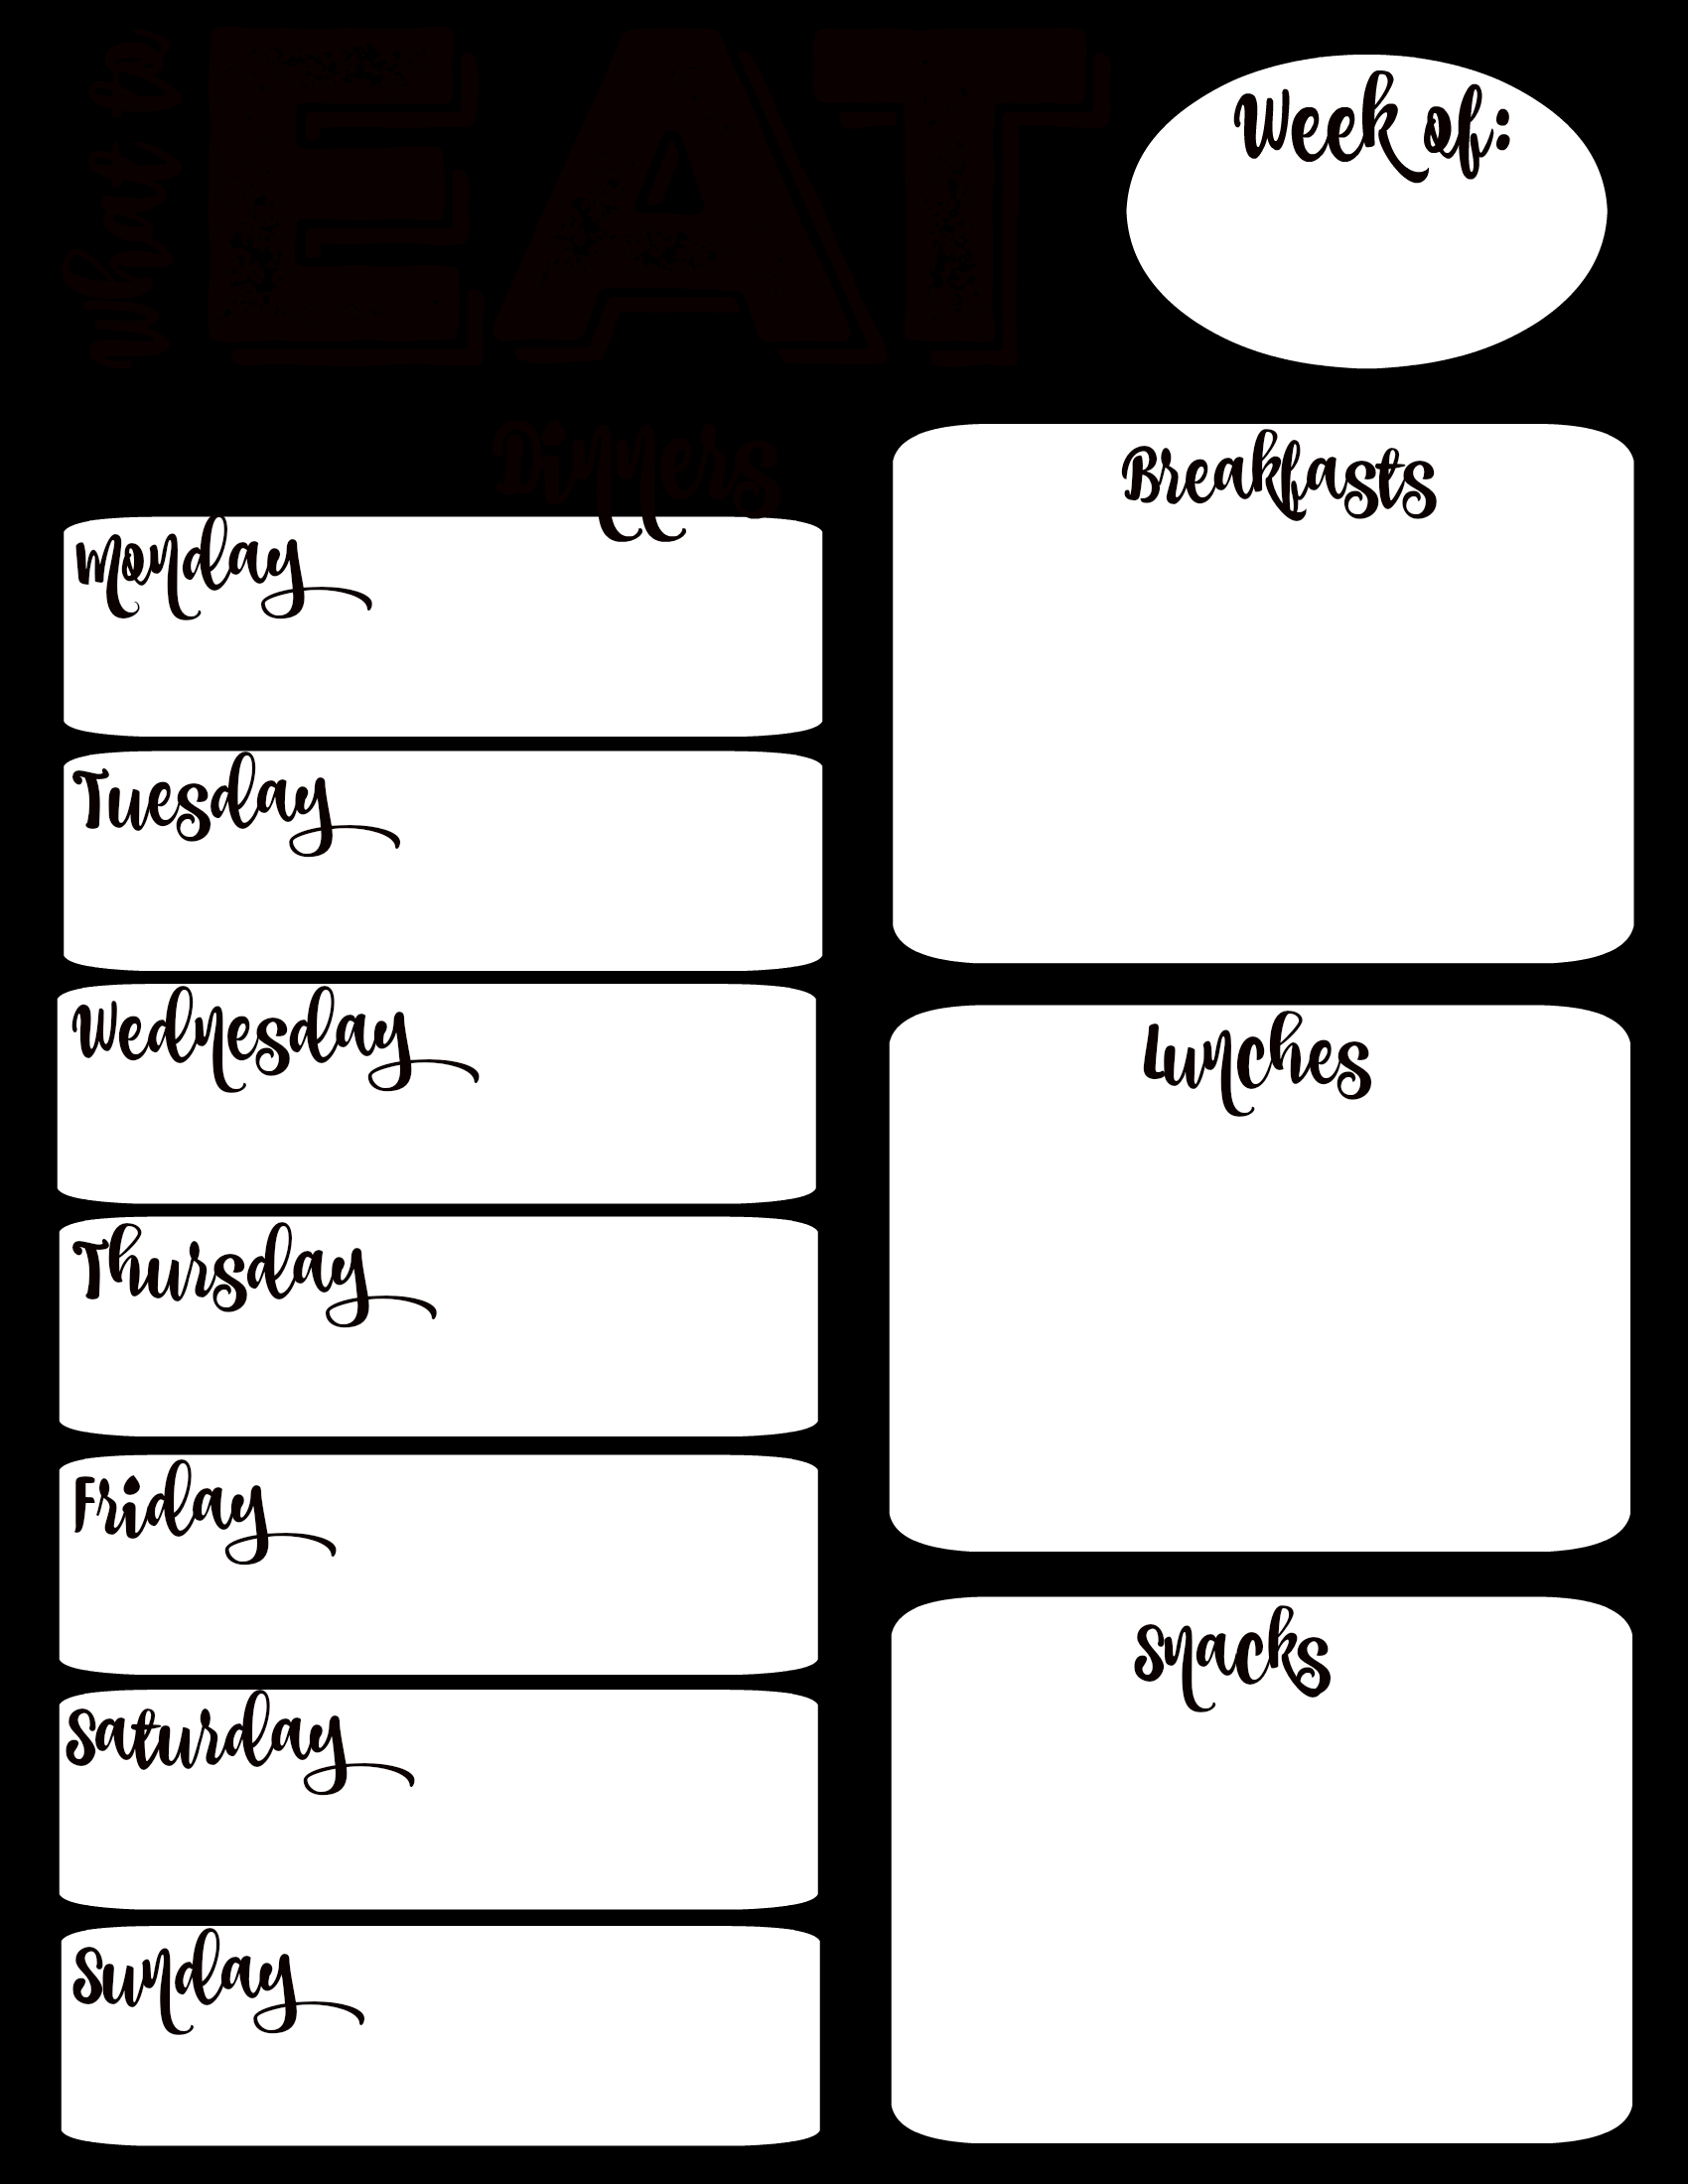 Free Printable What to Eat Weekly Meal Planning at thehappyhousie.com